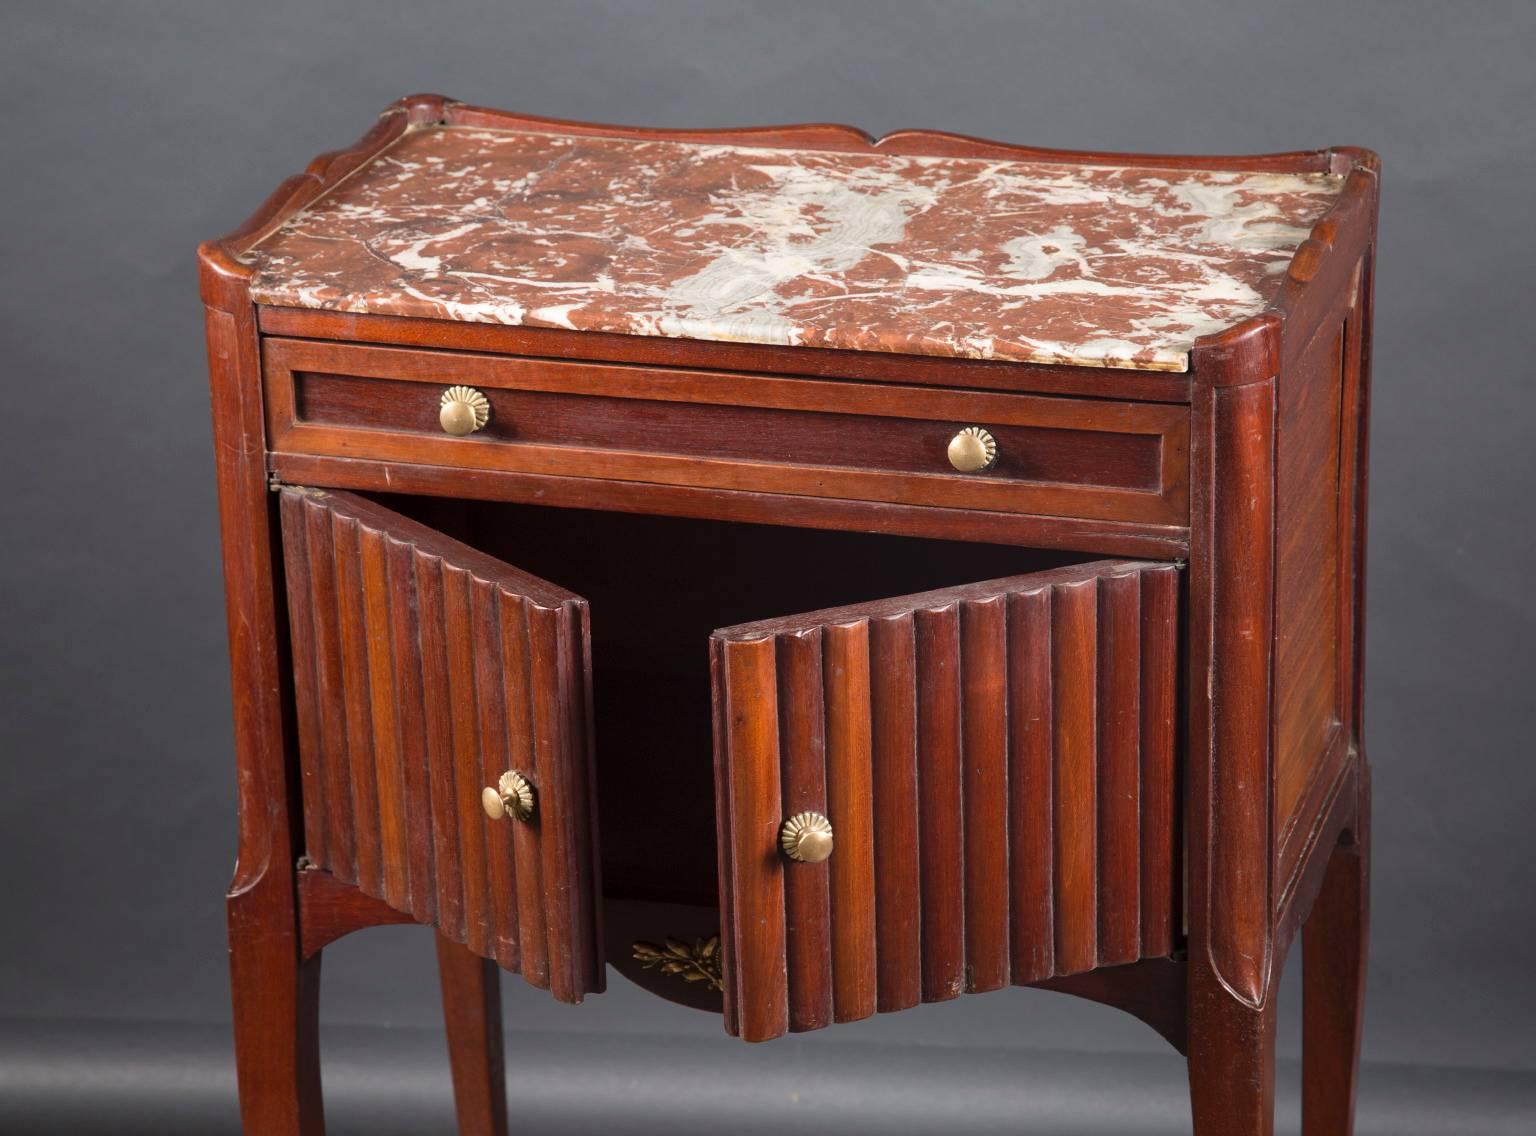 This bedside table was handcrafted in 19th century France from mahogany wood. It has a pullout drawer on top of two wood slat doors which open for storage space below the drawer. A slab of marble rests on top the table creating a beautiful useable